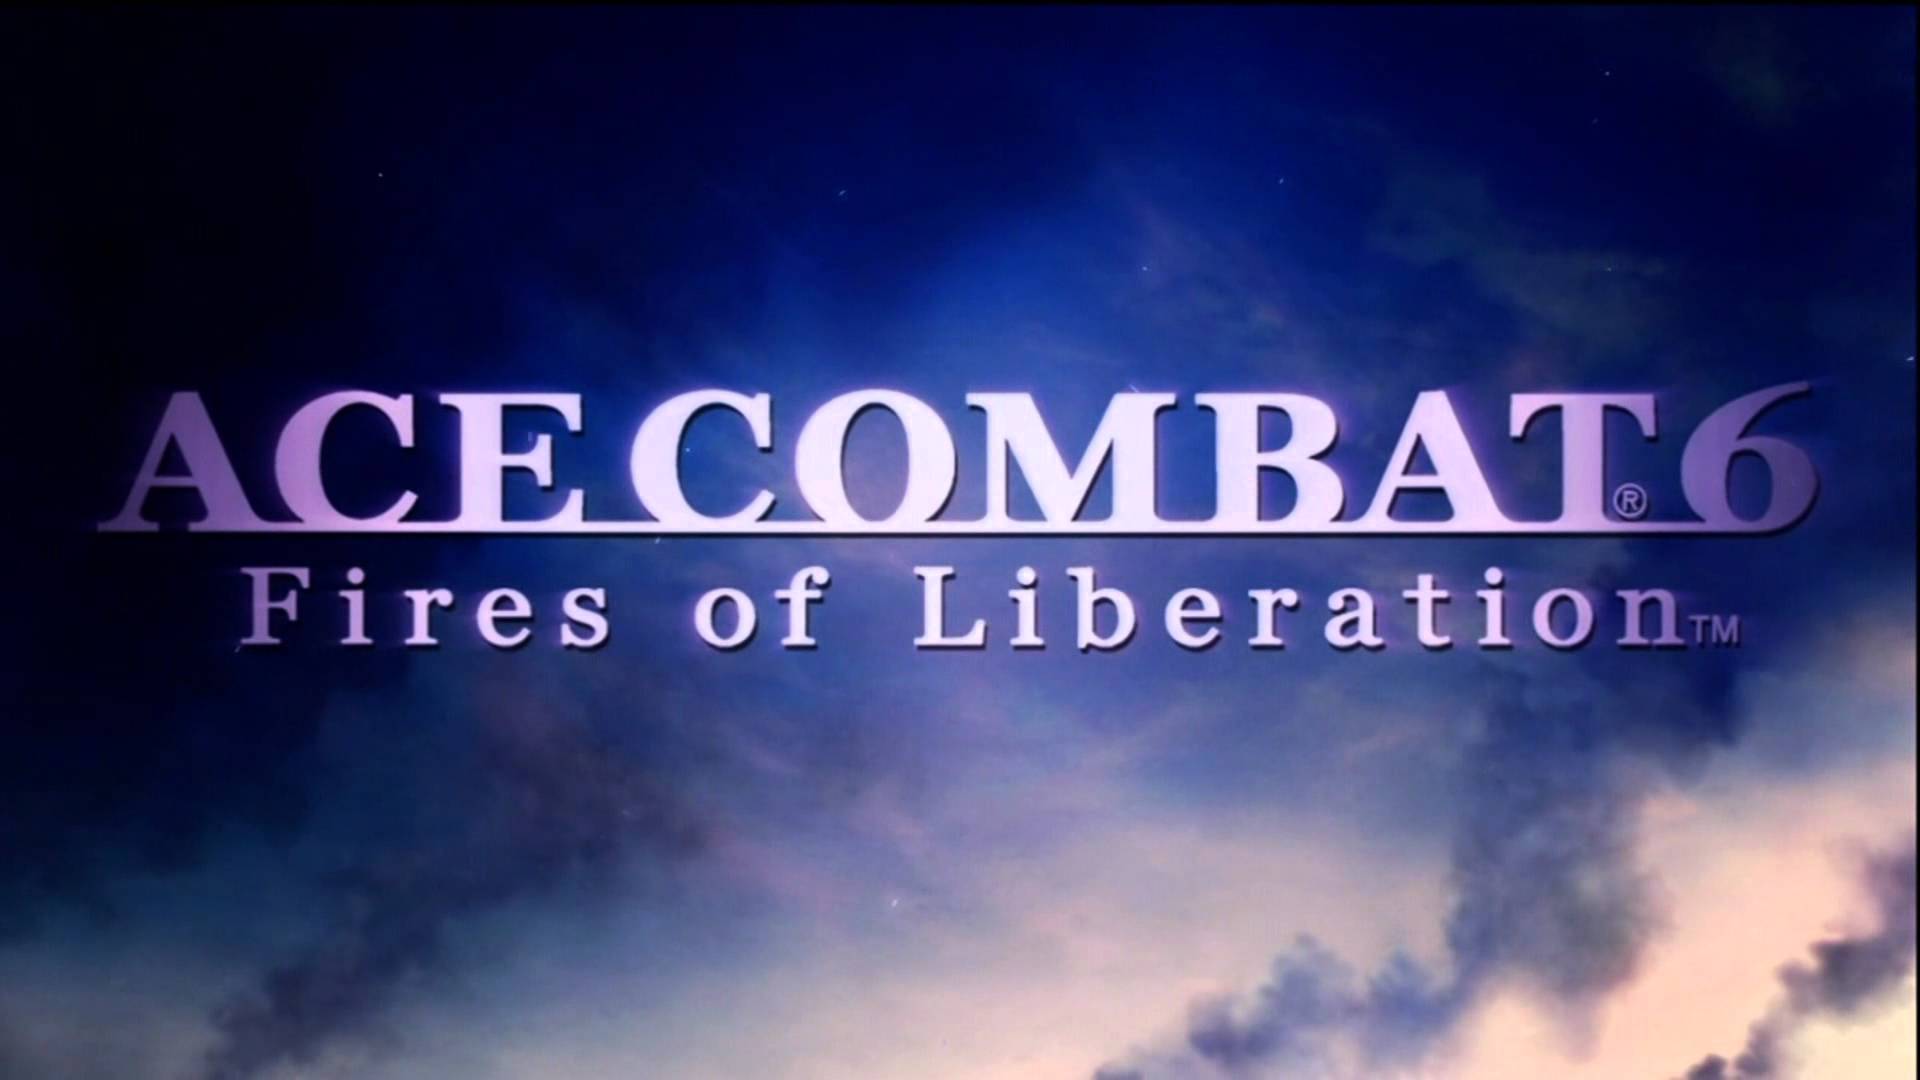 Ace Combat 6: Fires of Liberation Logo